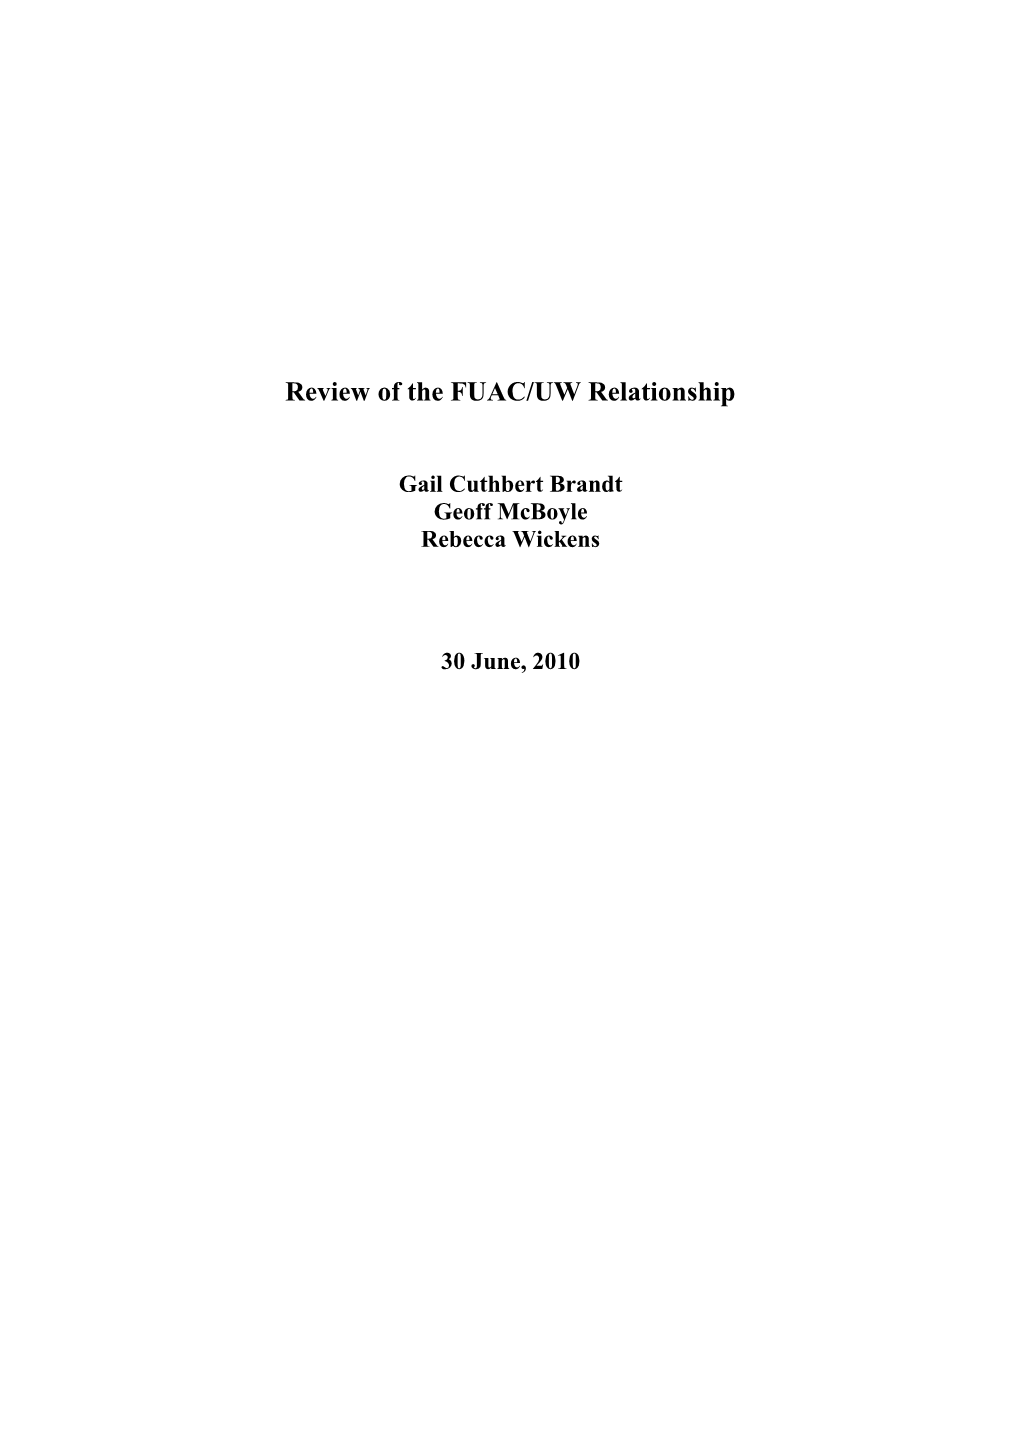 Review of the FUAC/UW Relationship